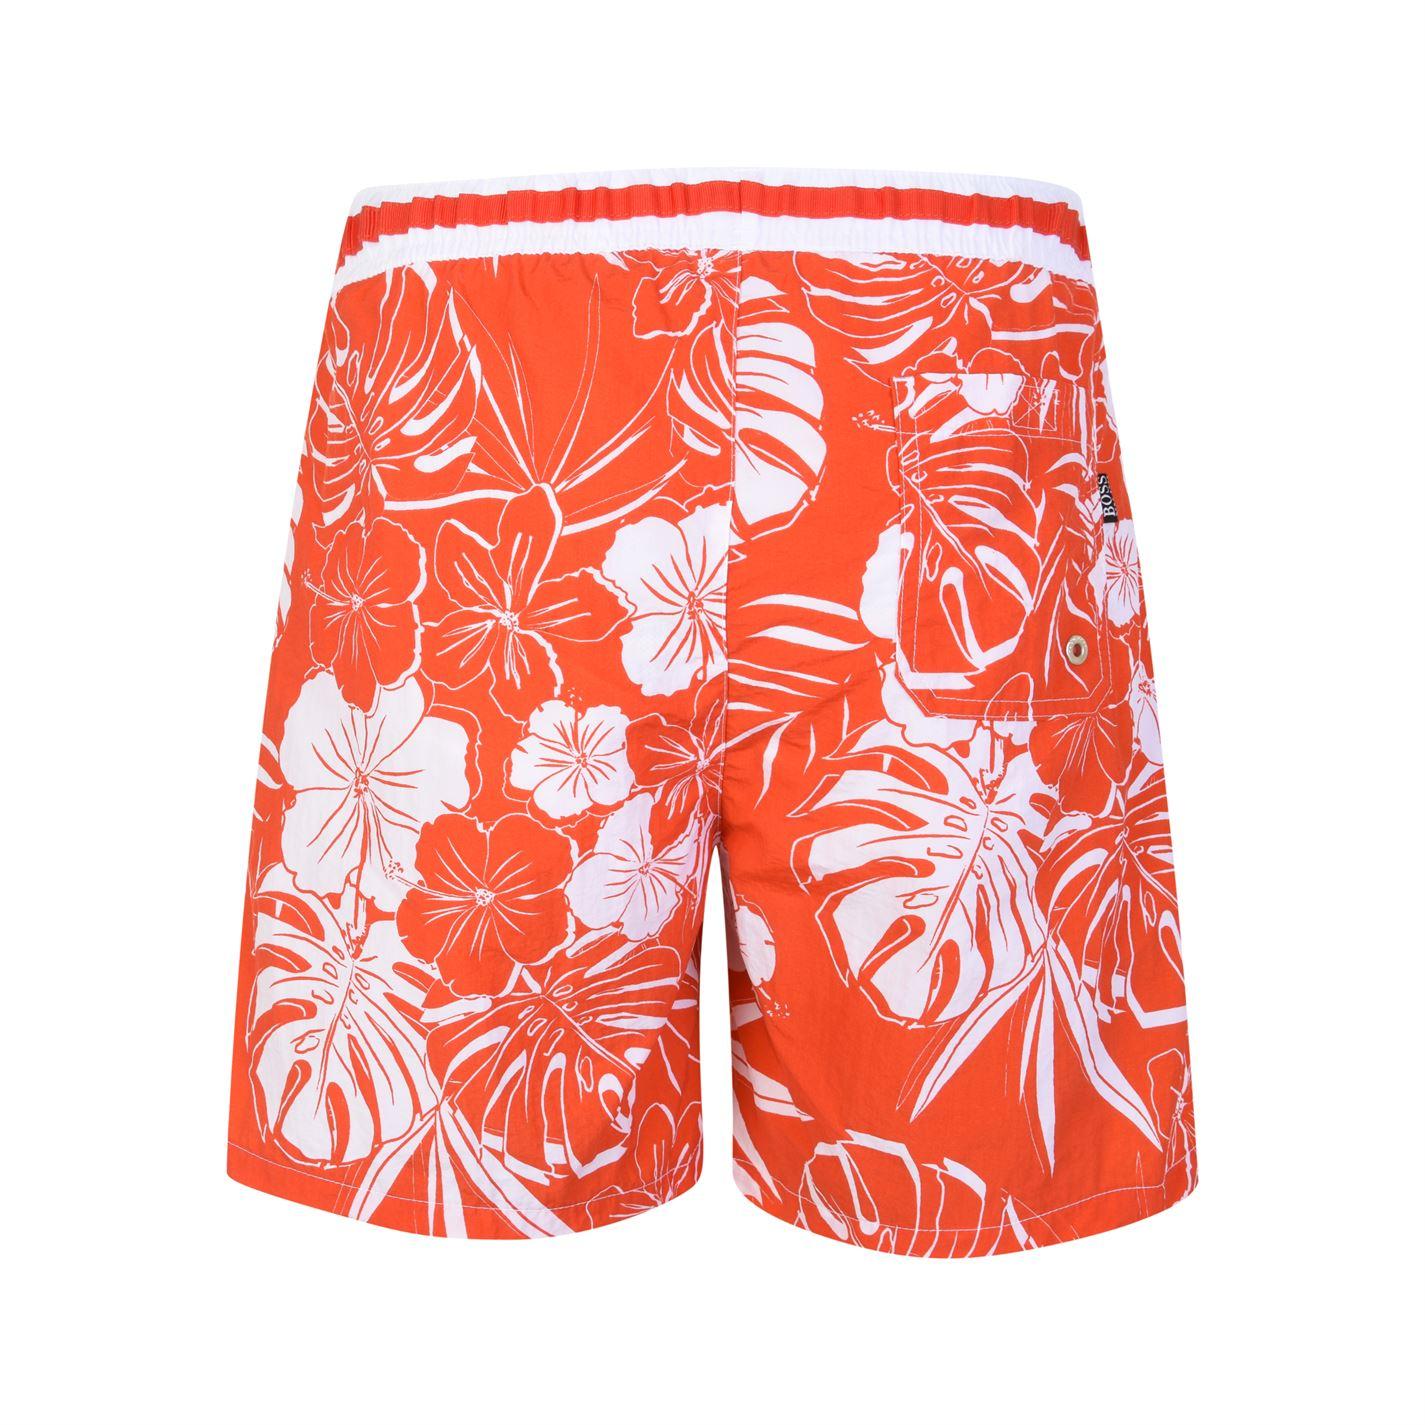 Lyst - BOSS by Hugo Boss Quick Dry Tropical Print Swim Shorts in Red ...